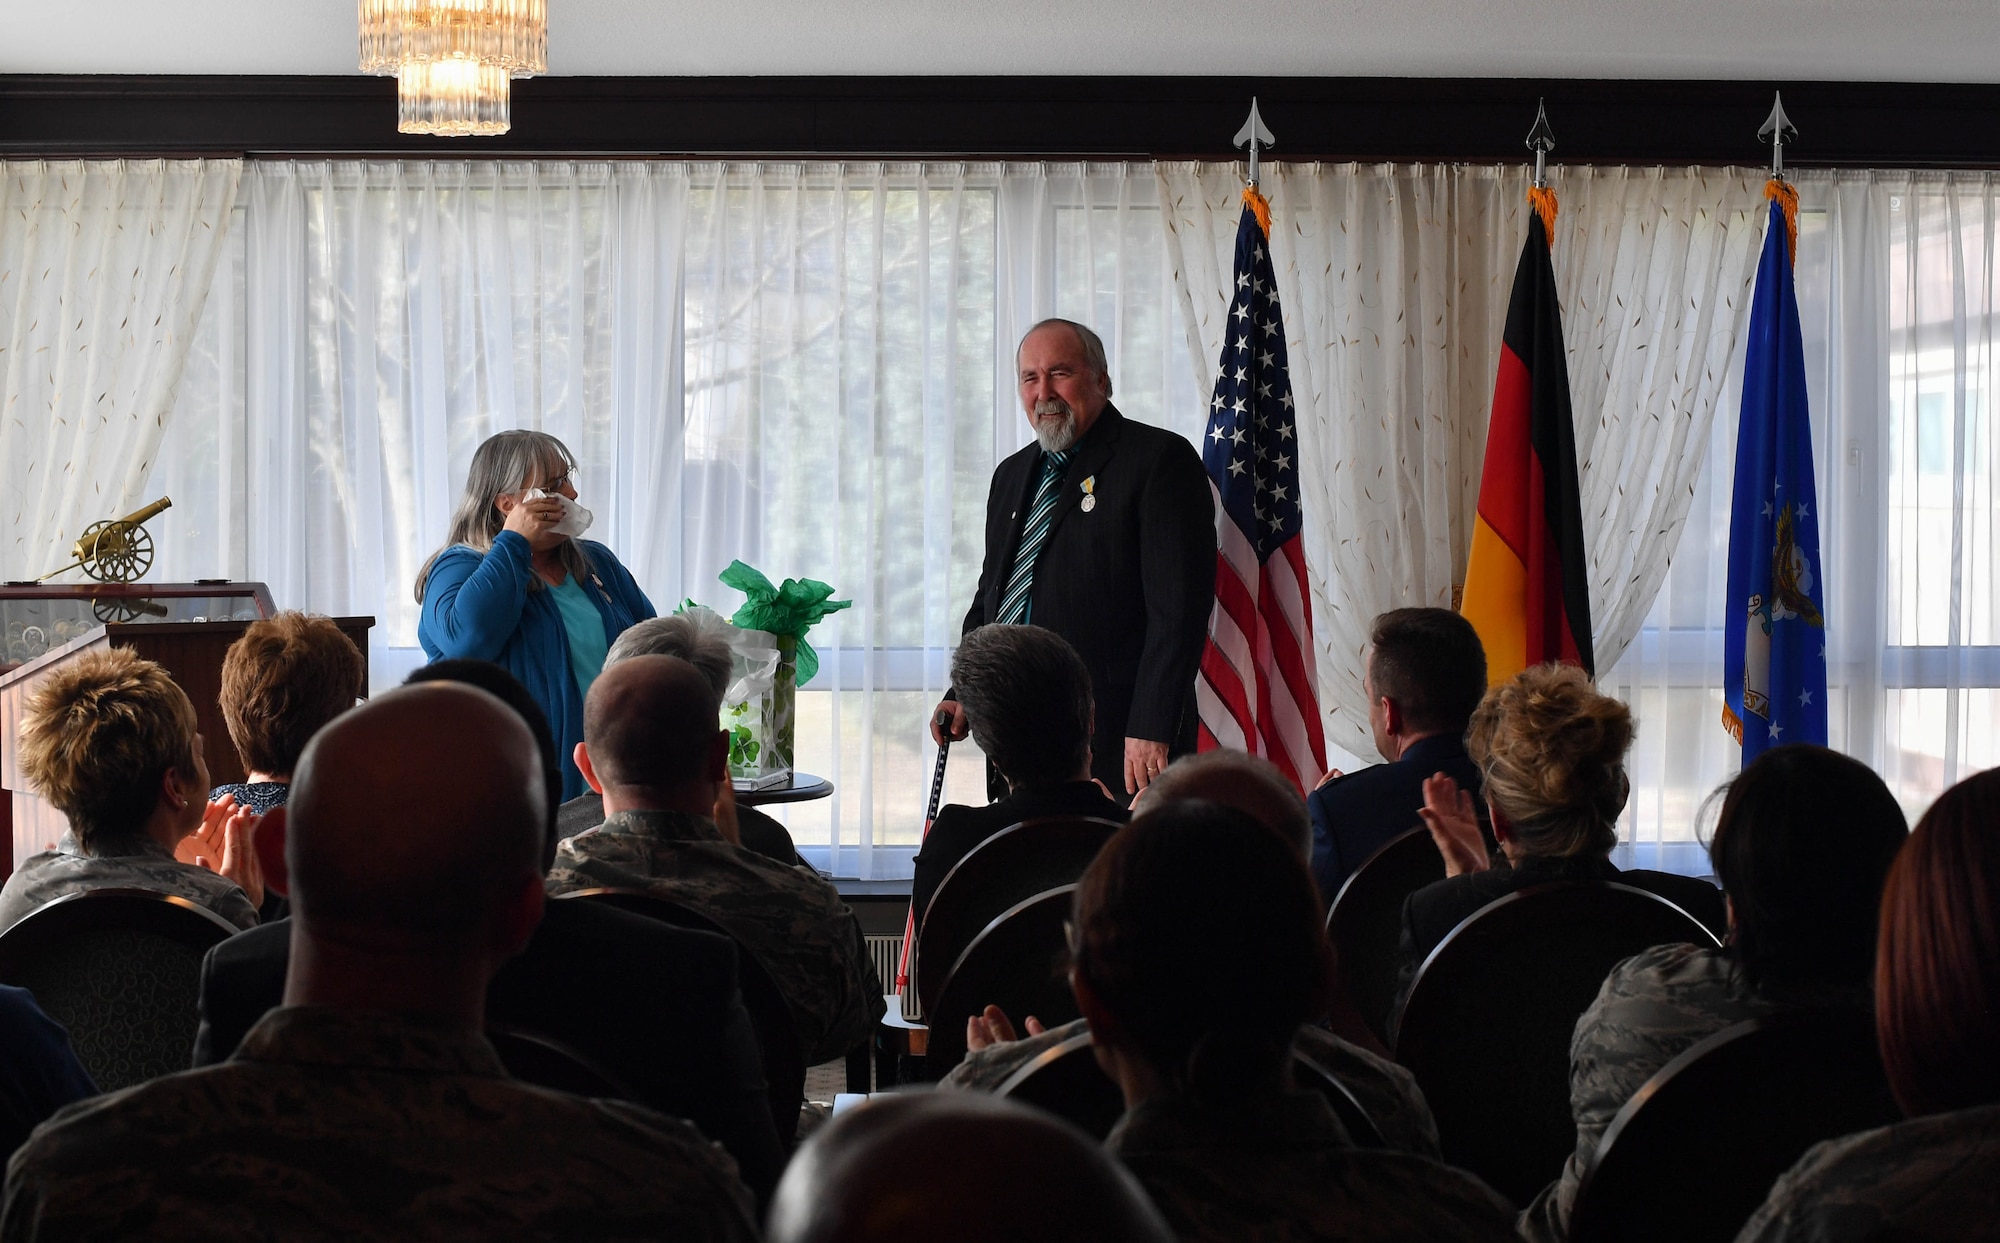 Colynn and John Hamilton, U.S. Air Forces in Europe human resources specialist and management analyst respectively, speak during their dual retirement ceremony on Ramstein Air Base, Germany, Feb. 24, 2017. After over 80 years of combined service, the Hamiltons retired to spend time with their five kids and 12 grandchildren. (U.S Air Force photo by Senior Airman Tryphena Mayhugh)